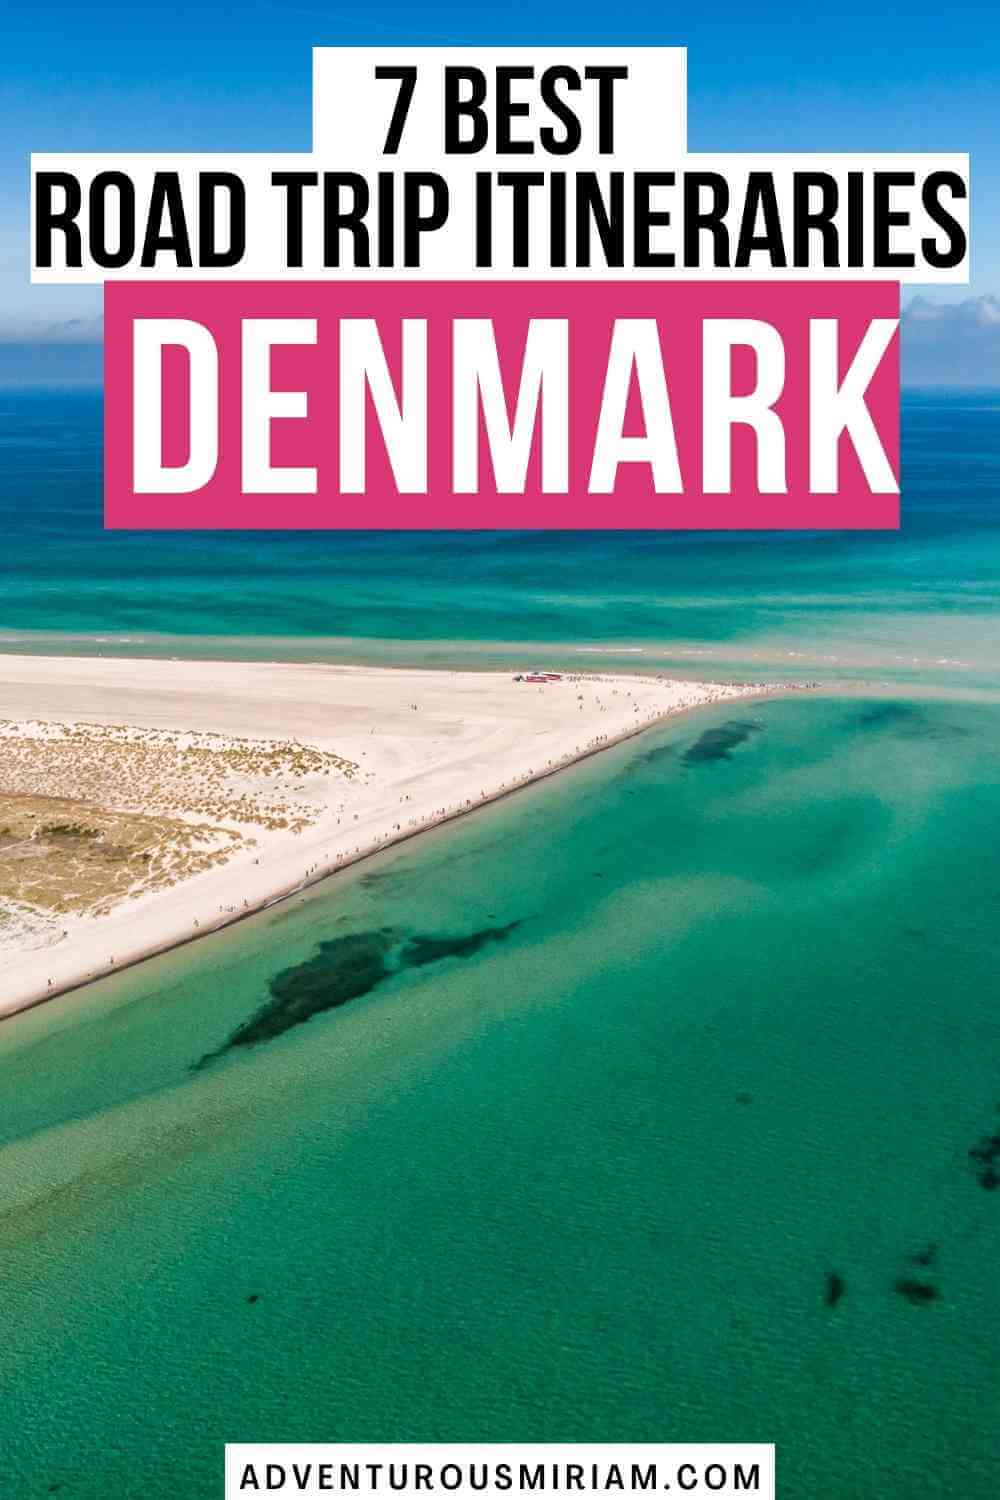 Most visitors that come to Denmark only visit Copenhagen, and that’s a shame because there are SO many beautiful places here. Like Funen, which is the most romantic mini destination you’ve never heard of, or North Jutland which is blessed with enchanted forests and a watery and rugged beauty. Here’s a list of the best summer road trips in Denmark.